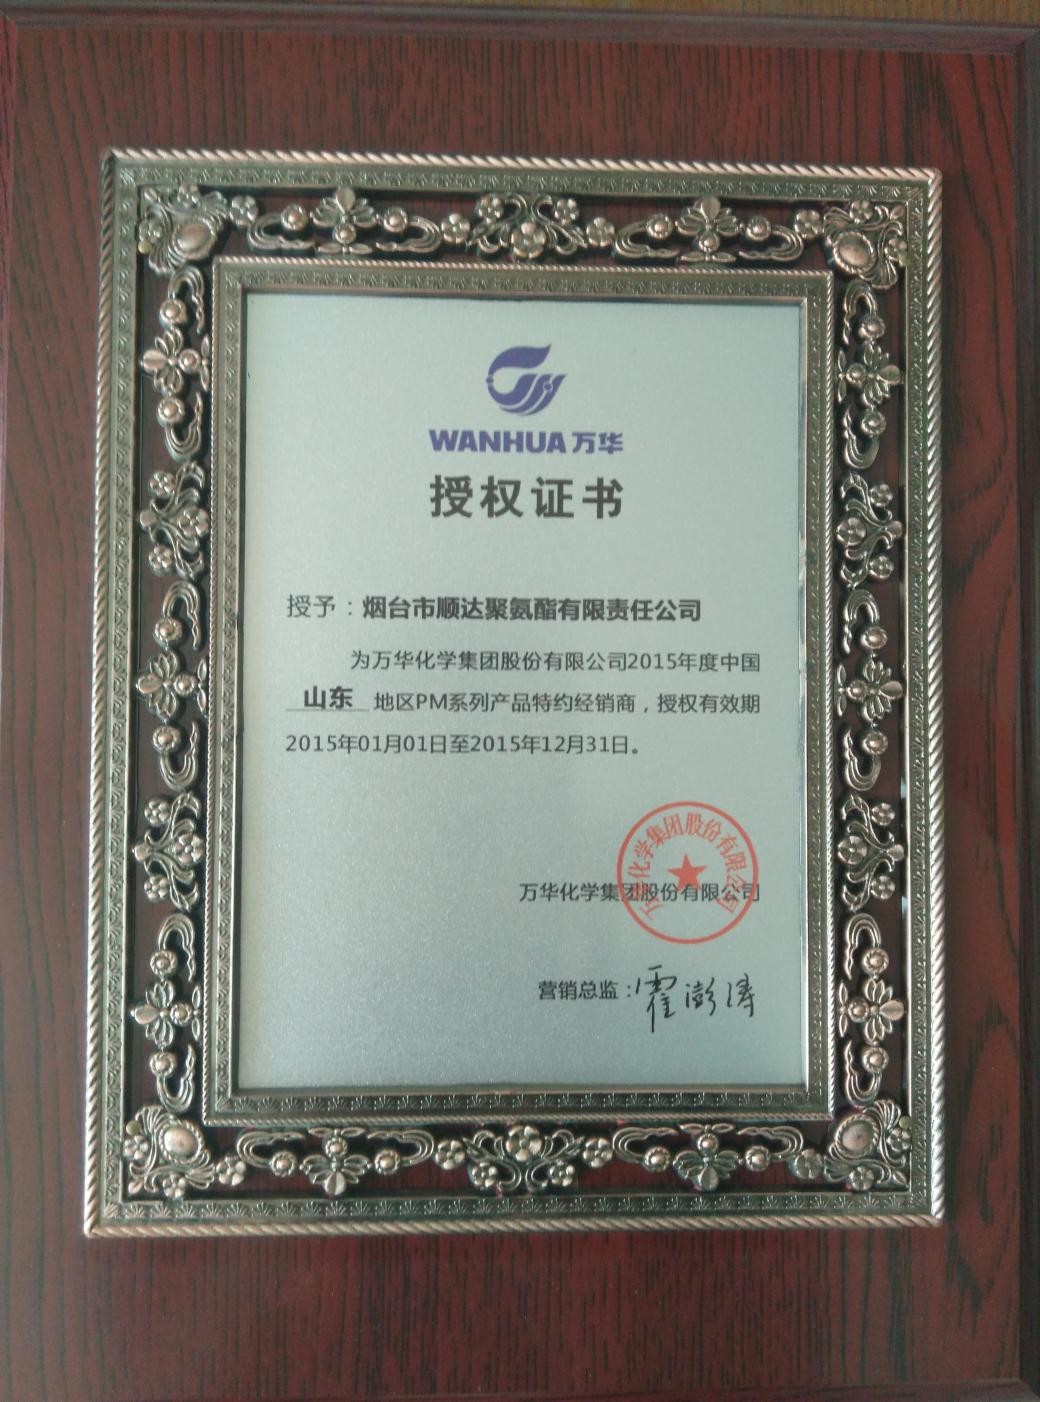 “The Outstanding Distributor” of Wanhua Company